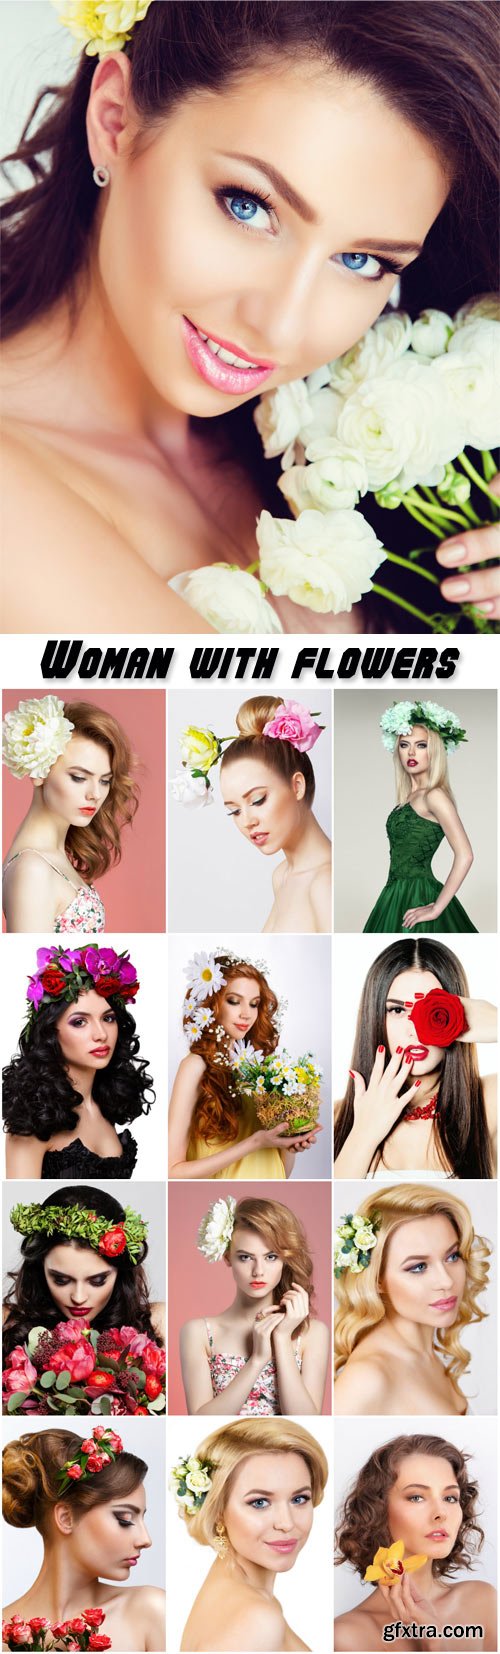 Alluring woman with flowers